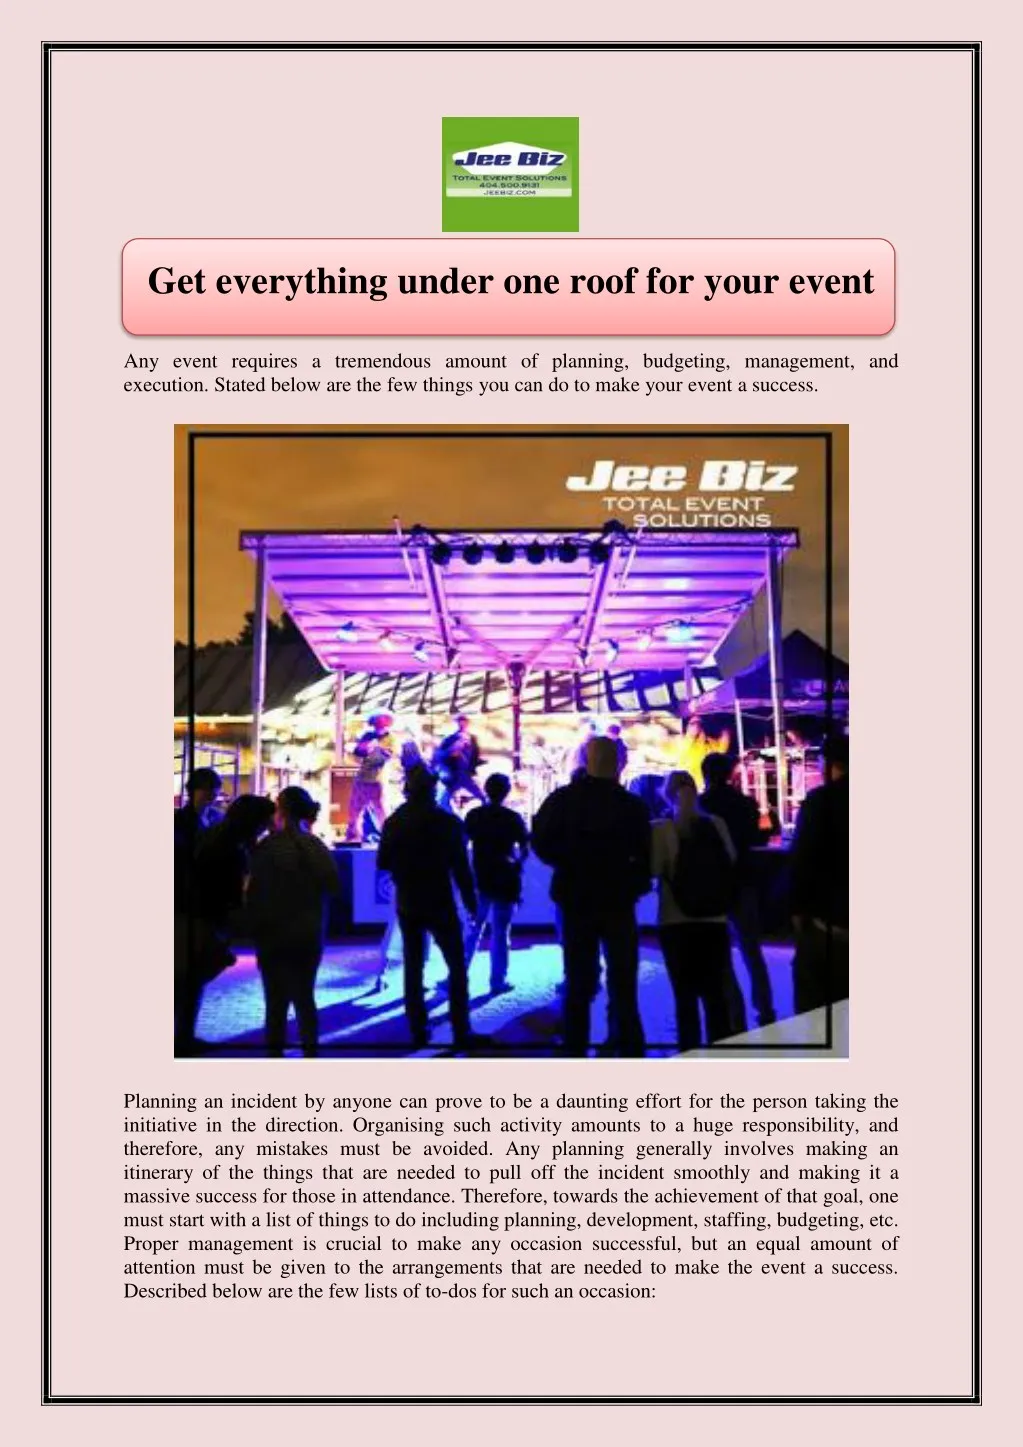 get everything under one roof for your event